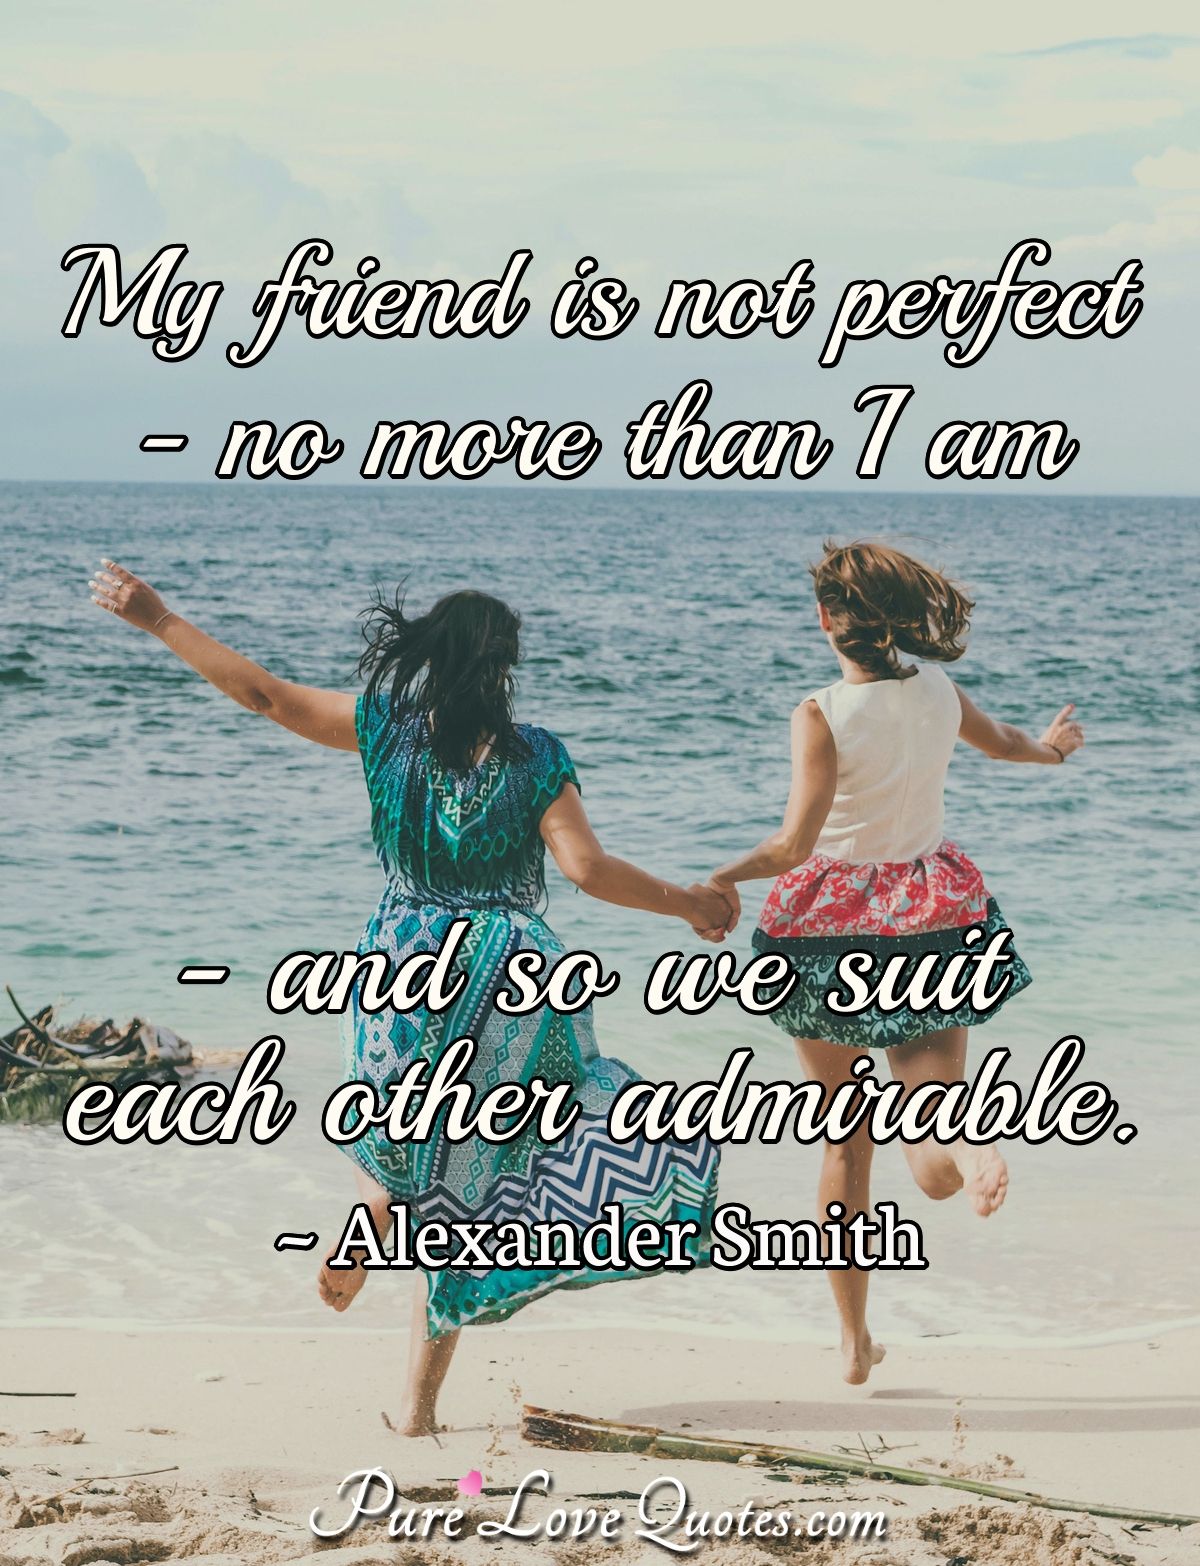 My friend is not perfect-no more than I am-and so we suit each other admirable. - Alexander Smith